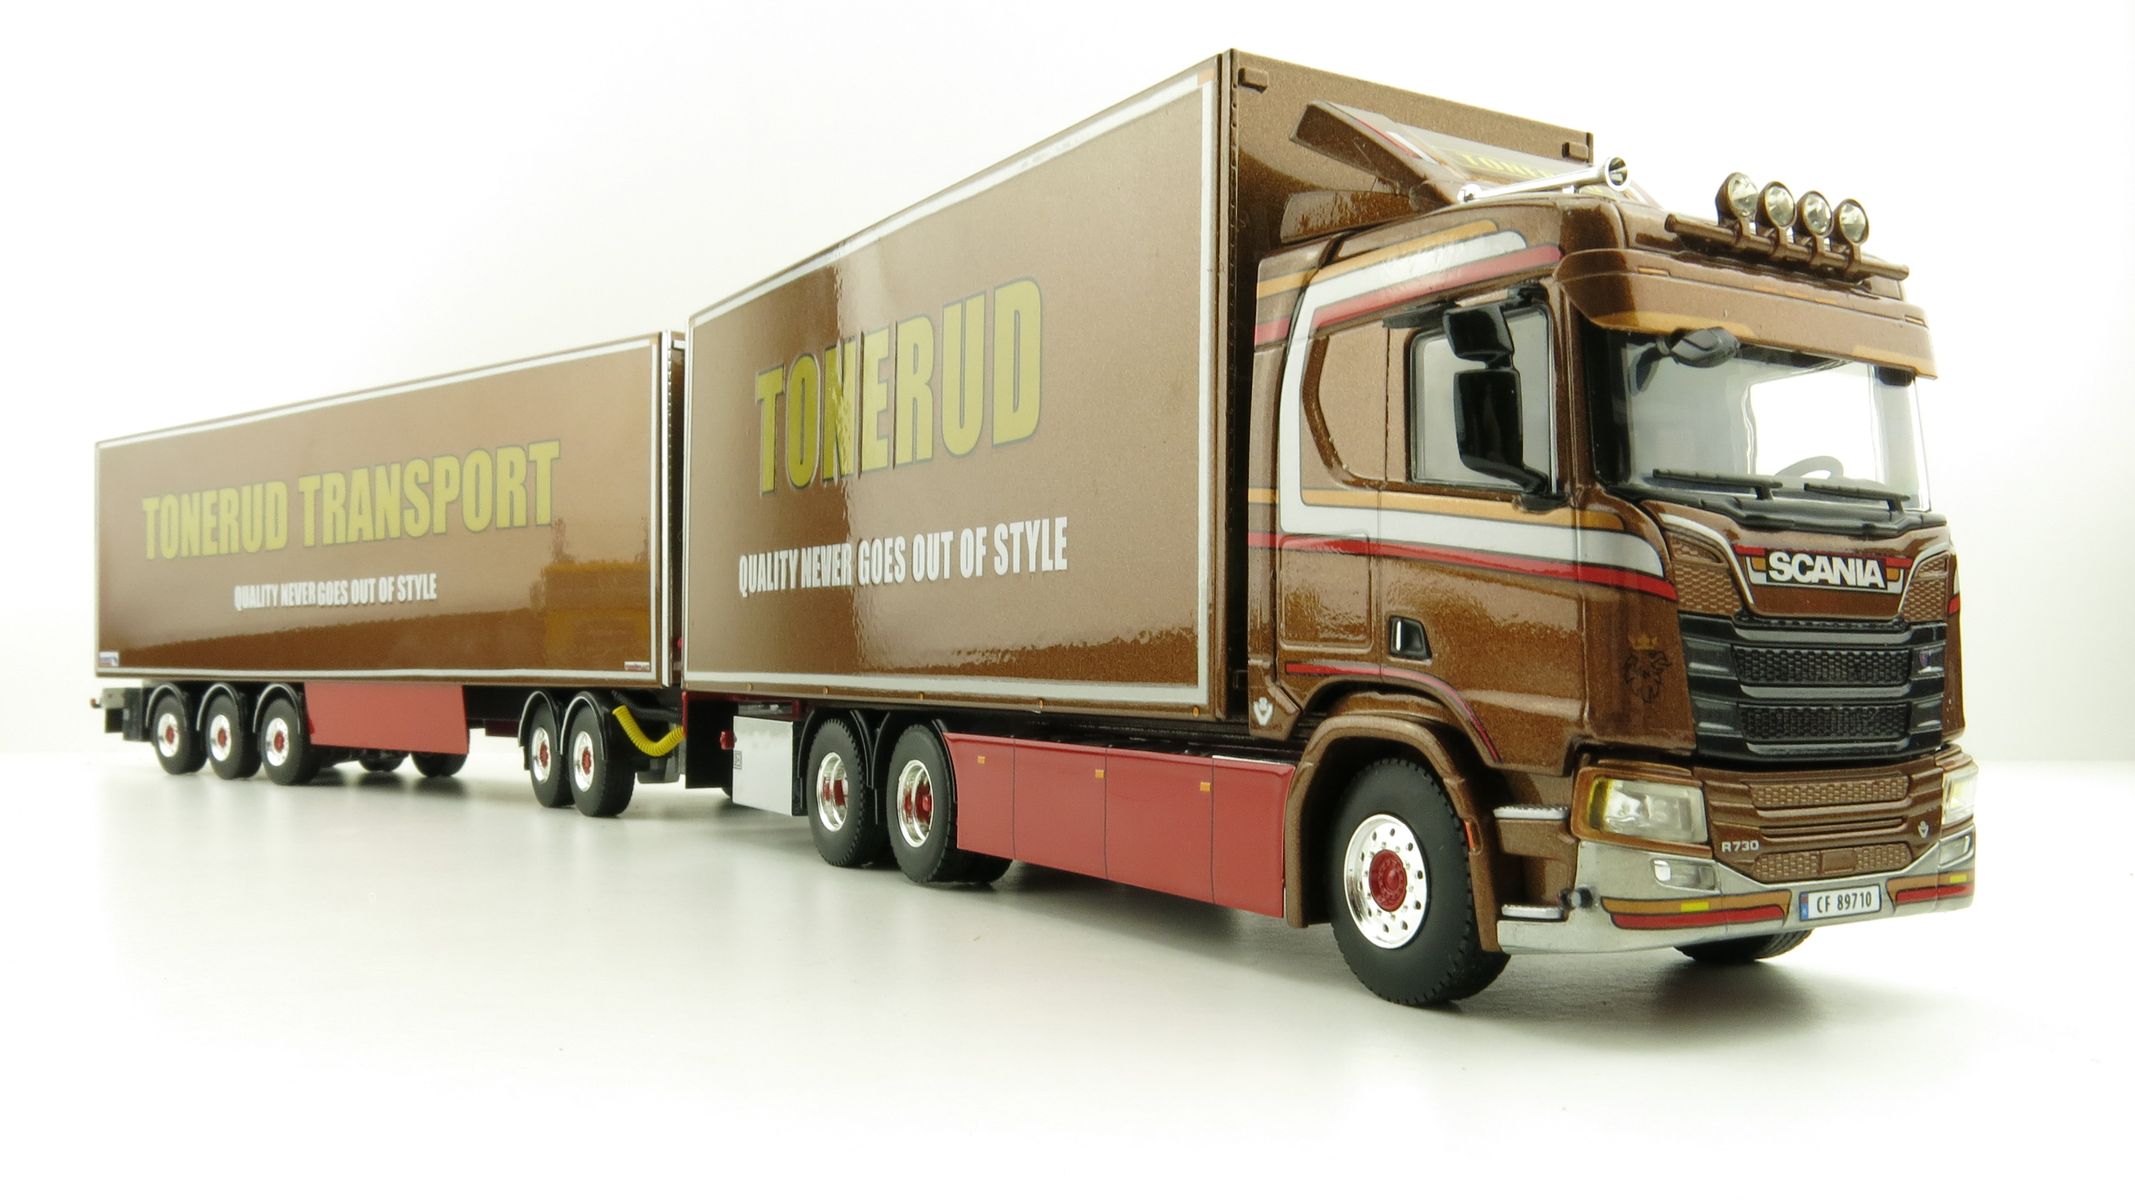 Product Image - WSI 01-2307 Scania R Normal CR20N 6x4 Rigid Truck LZV Sweden Combo - Tonerud - Scale 1:50